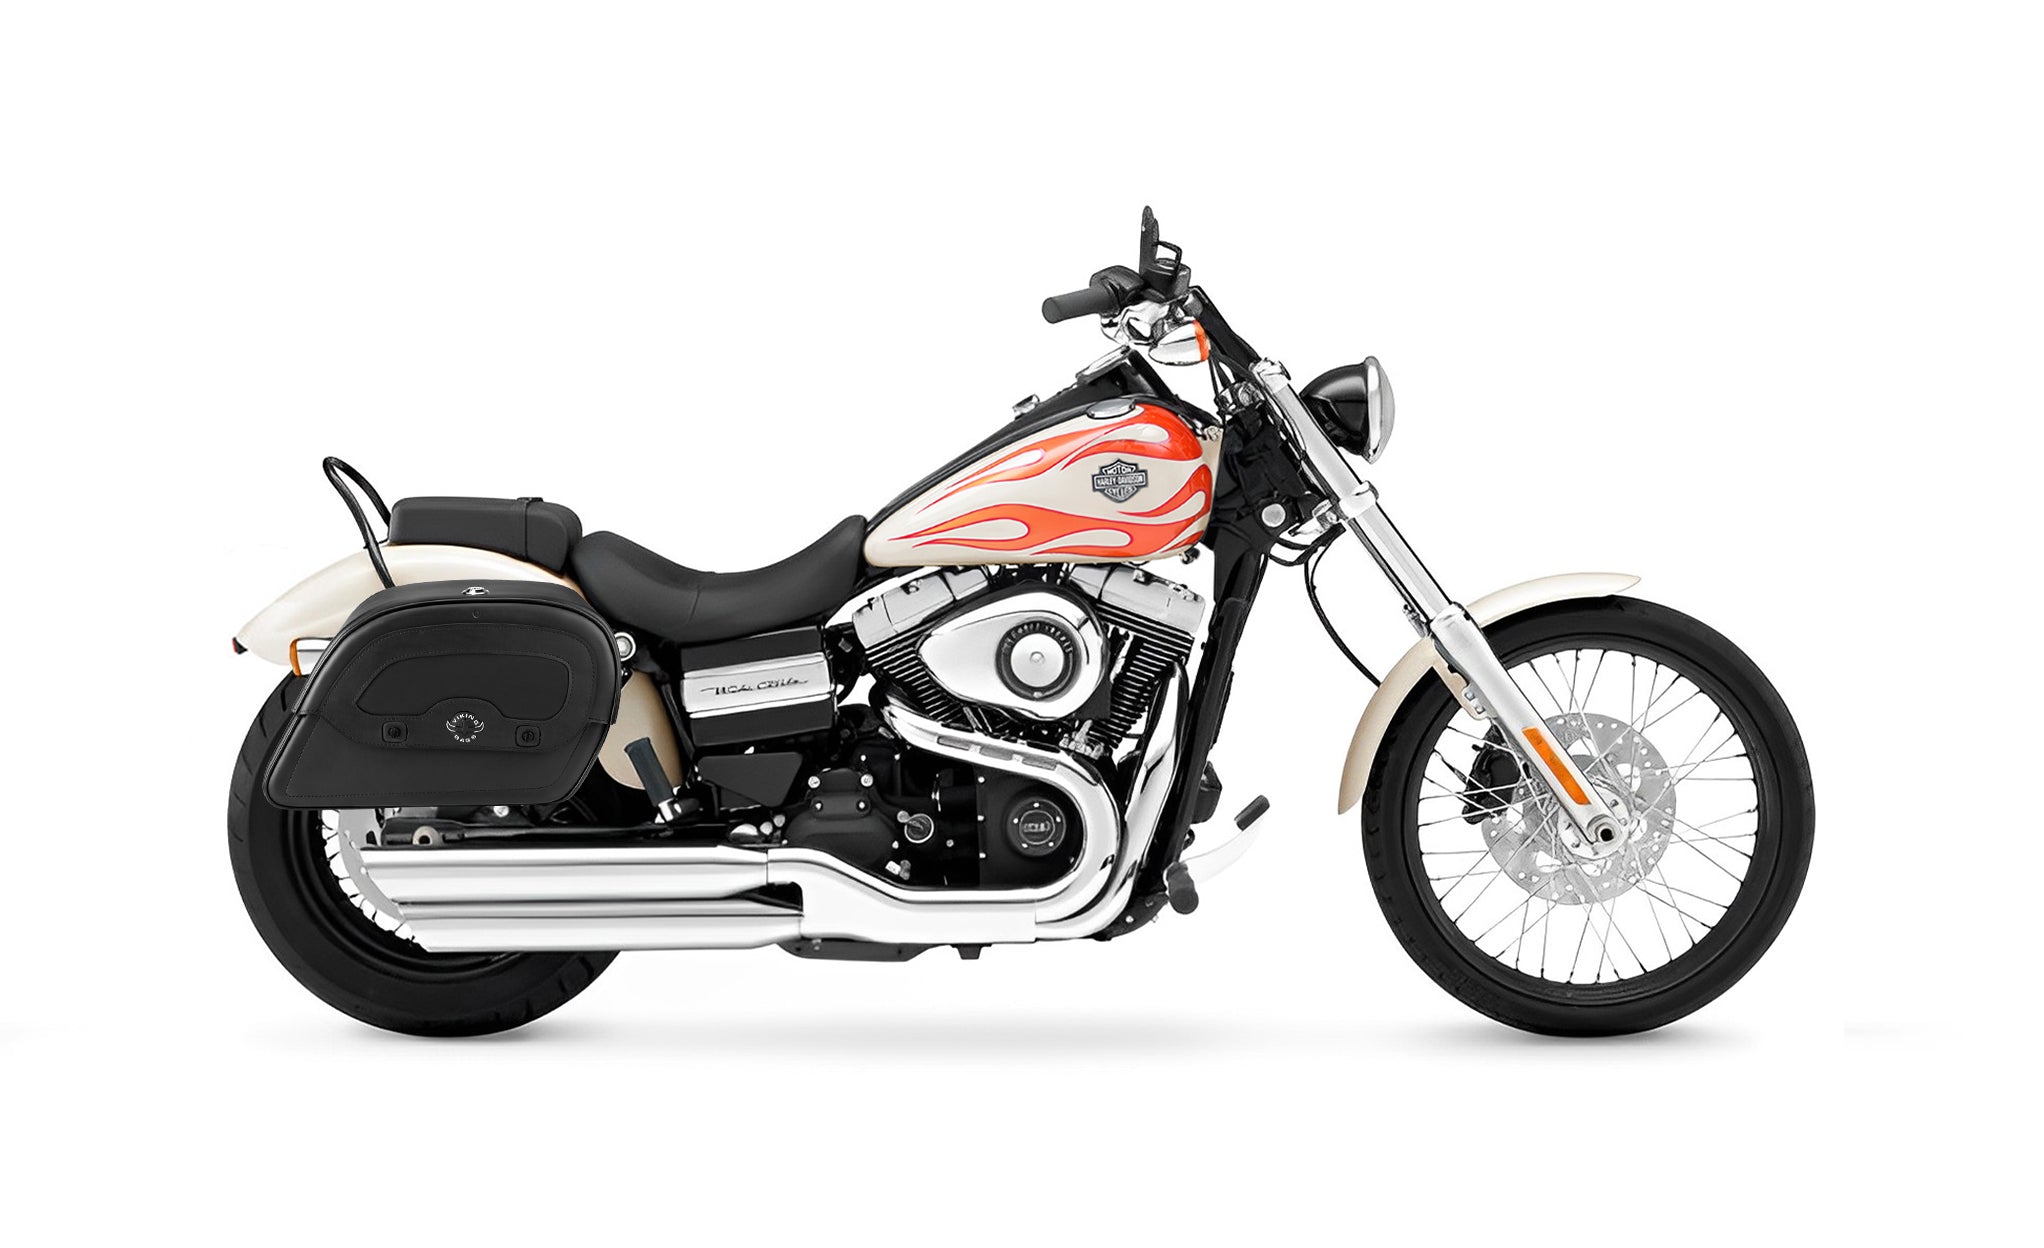 28L - Warrior Medium Quick-Mount Motorcycle Saddlebags For Harley Dyna Wide Glide FXDWG @expand